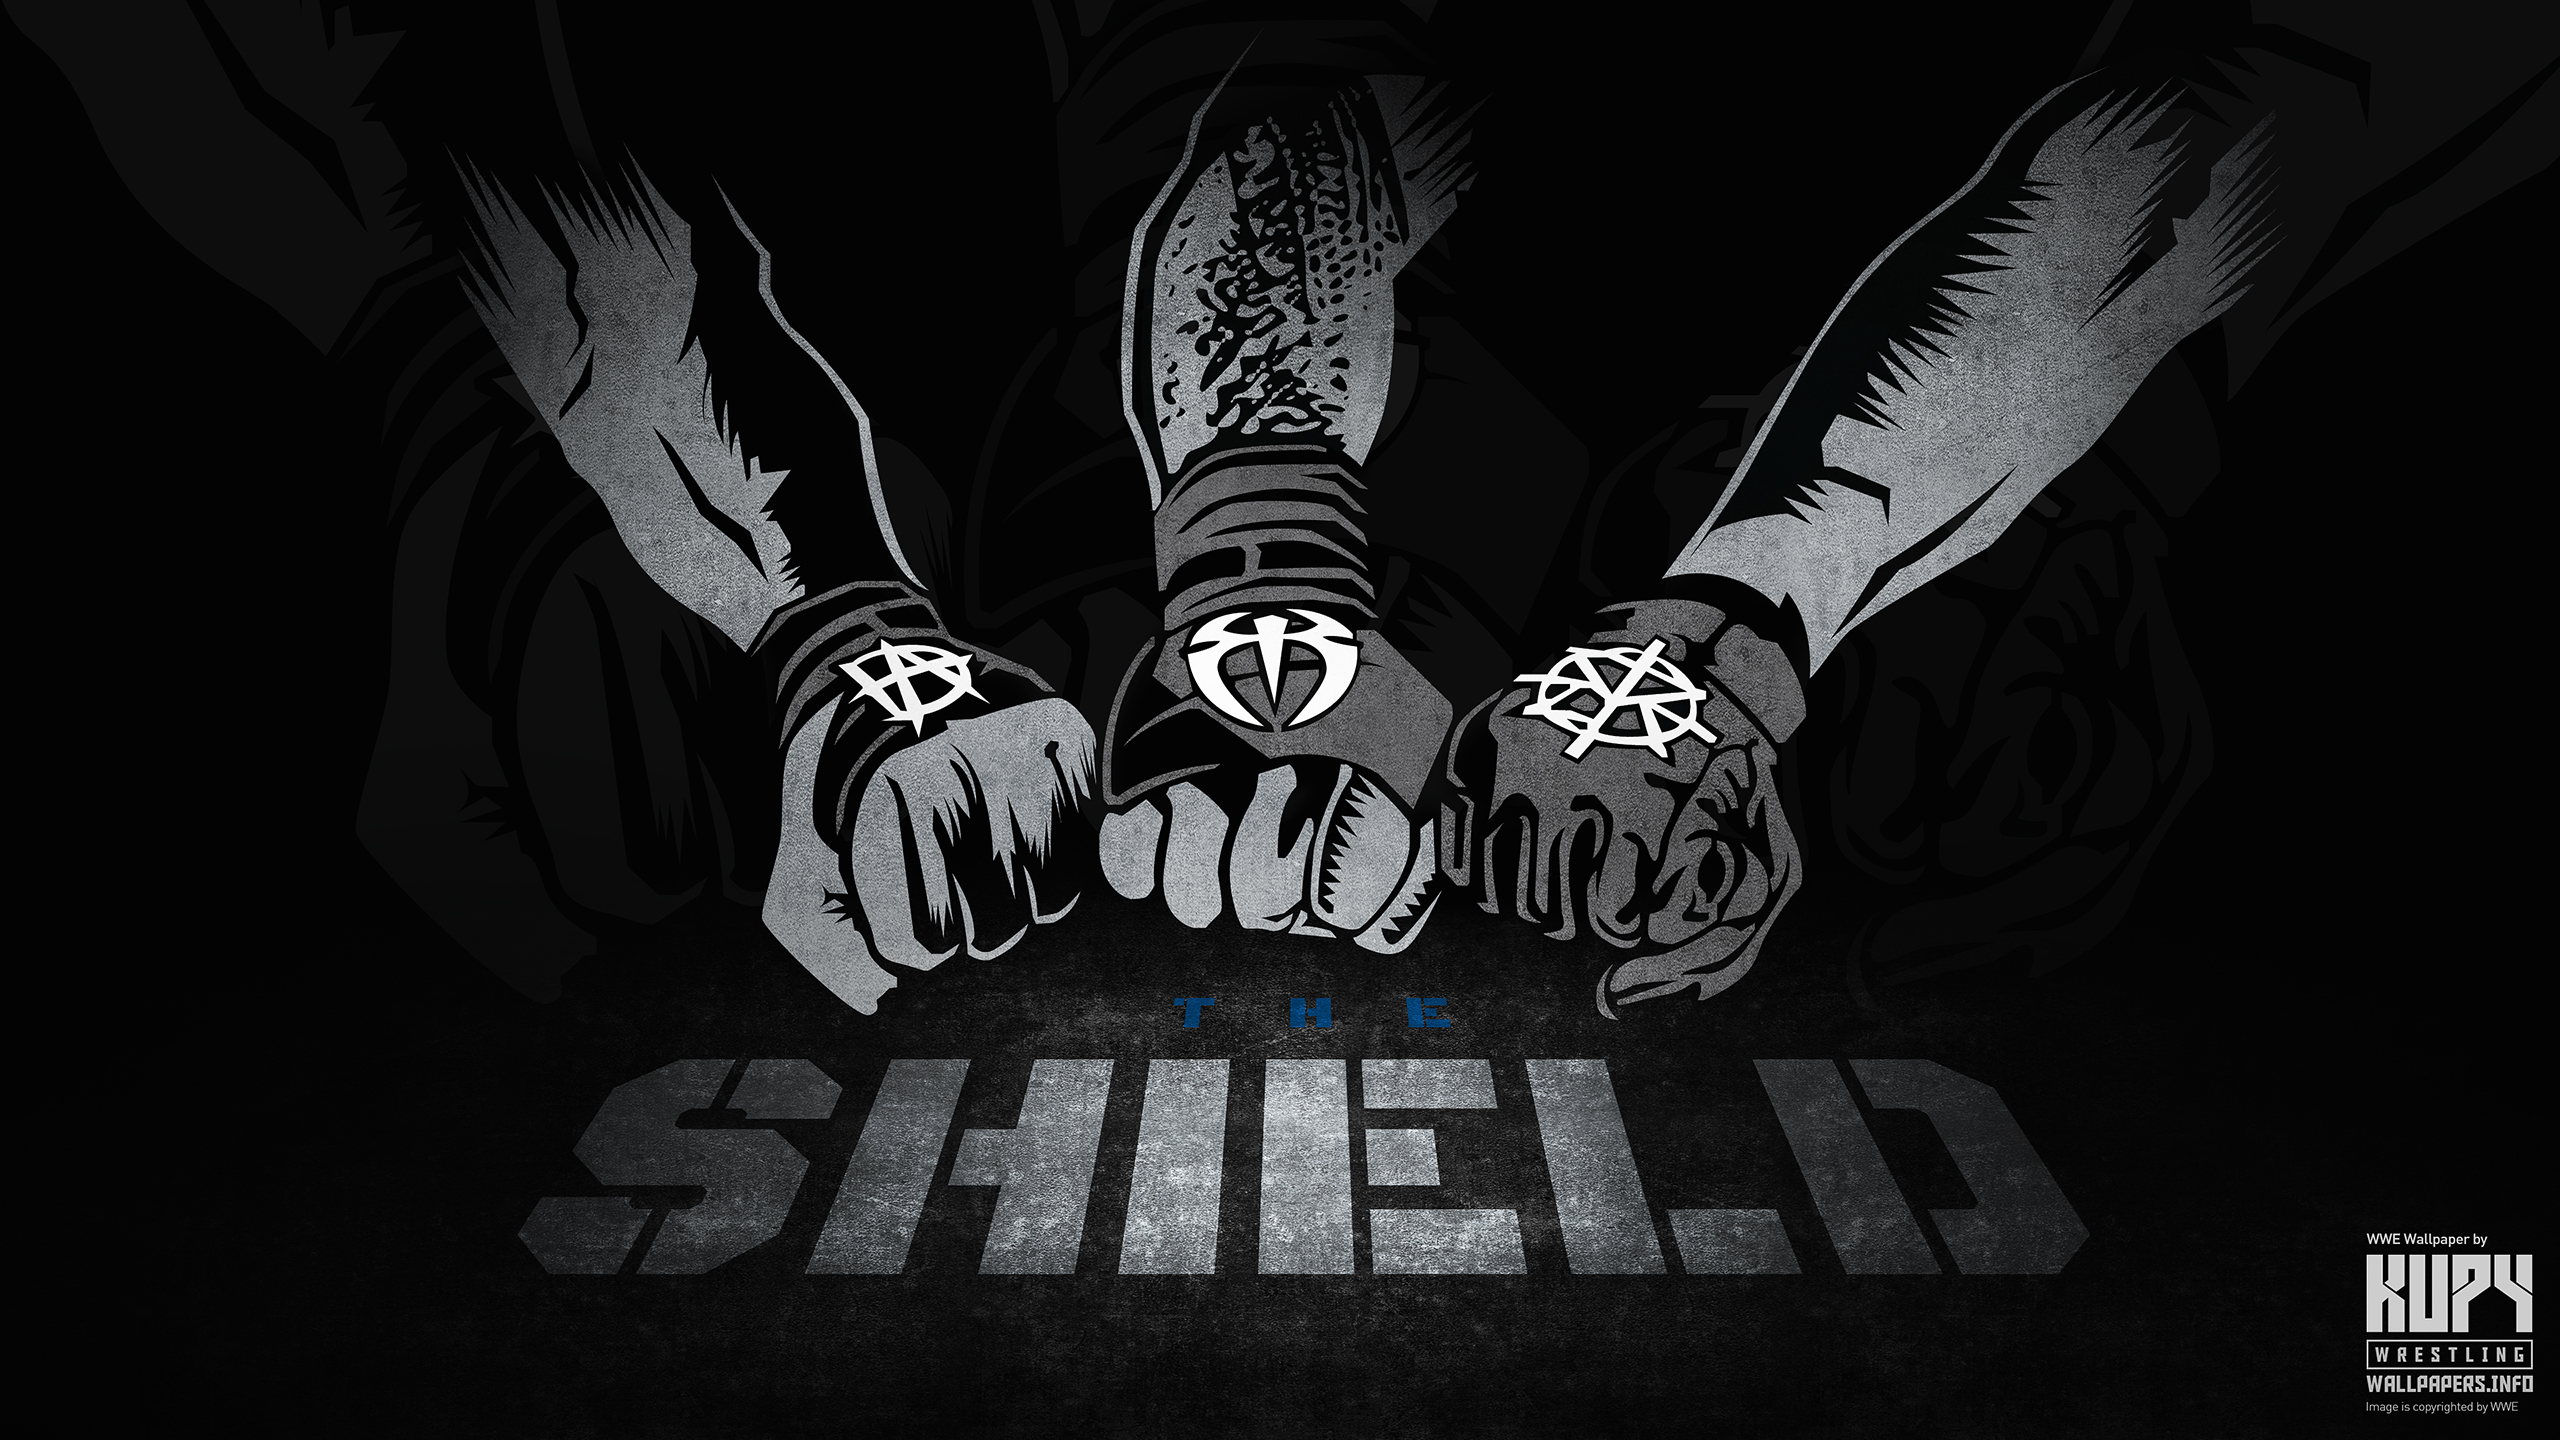 NEW The Shield Reunited wallpaper   Kupy Wrestling Wallpapers